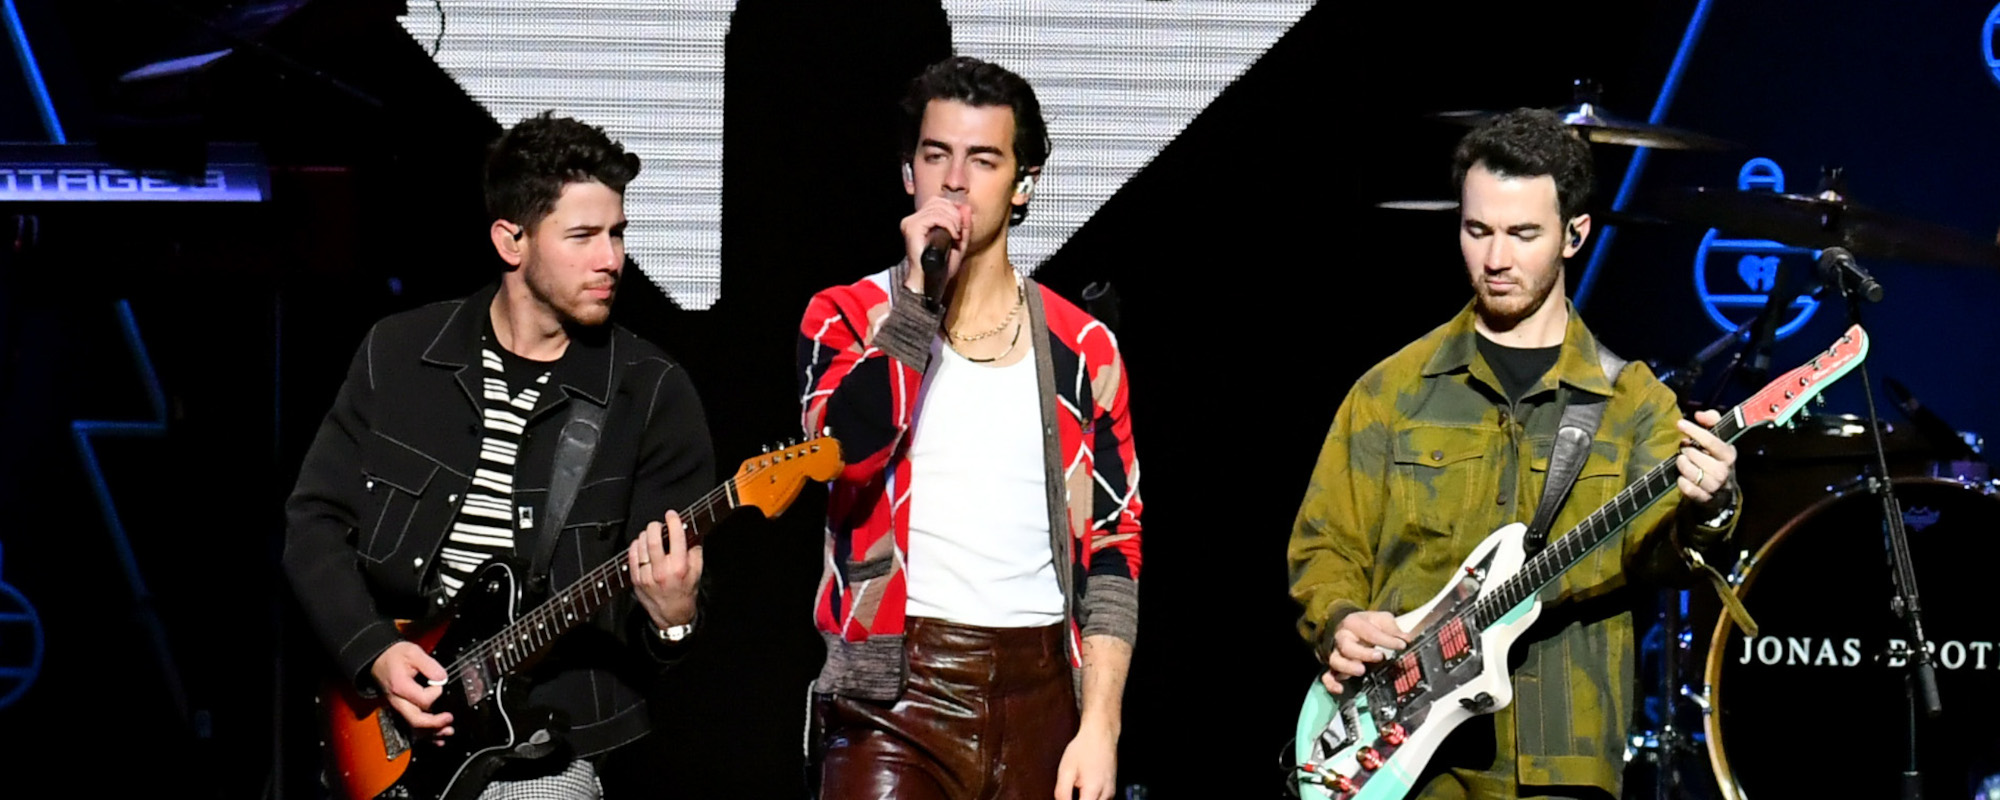 Nick Jonas Falls Into Hole on Stage During Jonas Brothers Concert